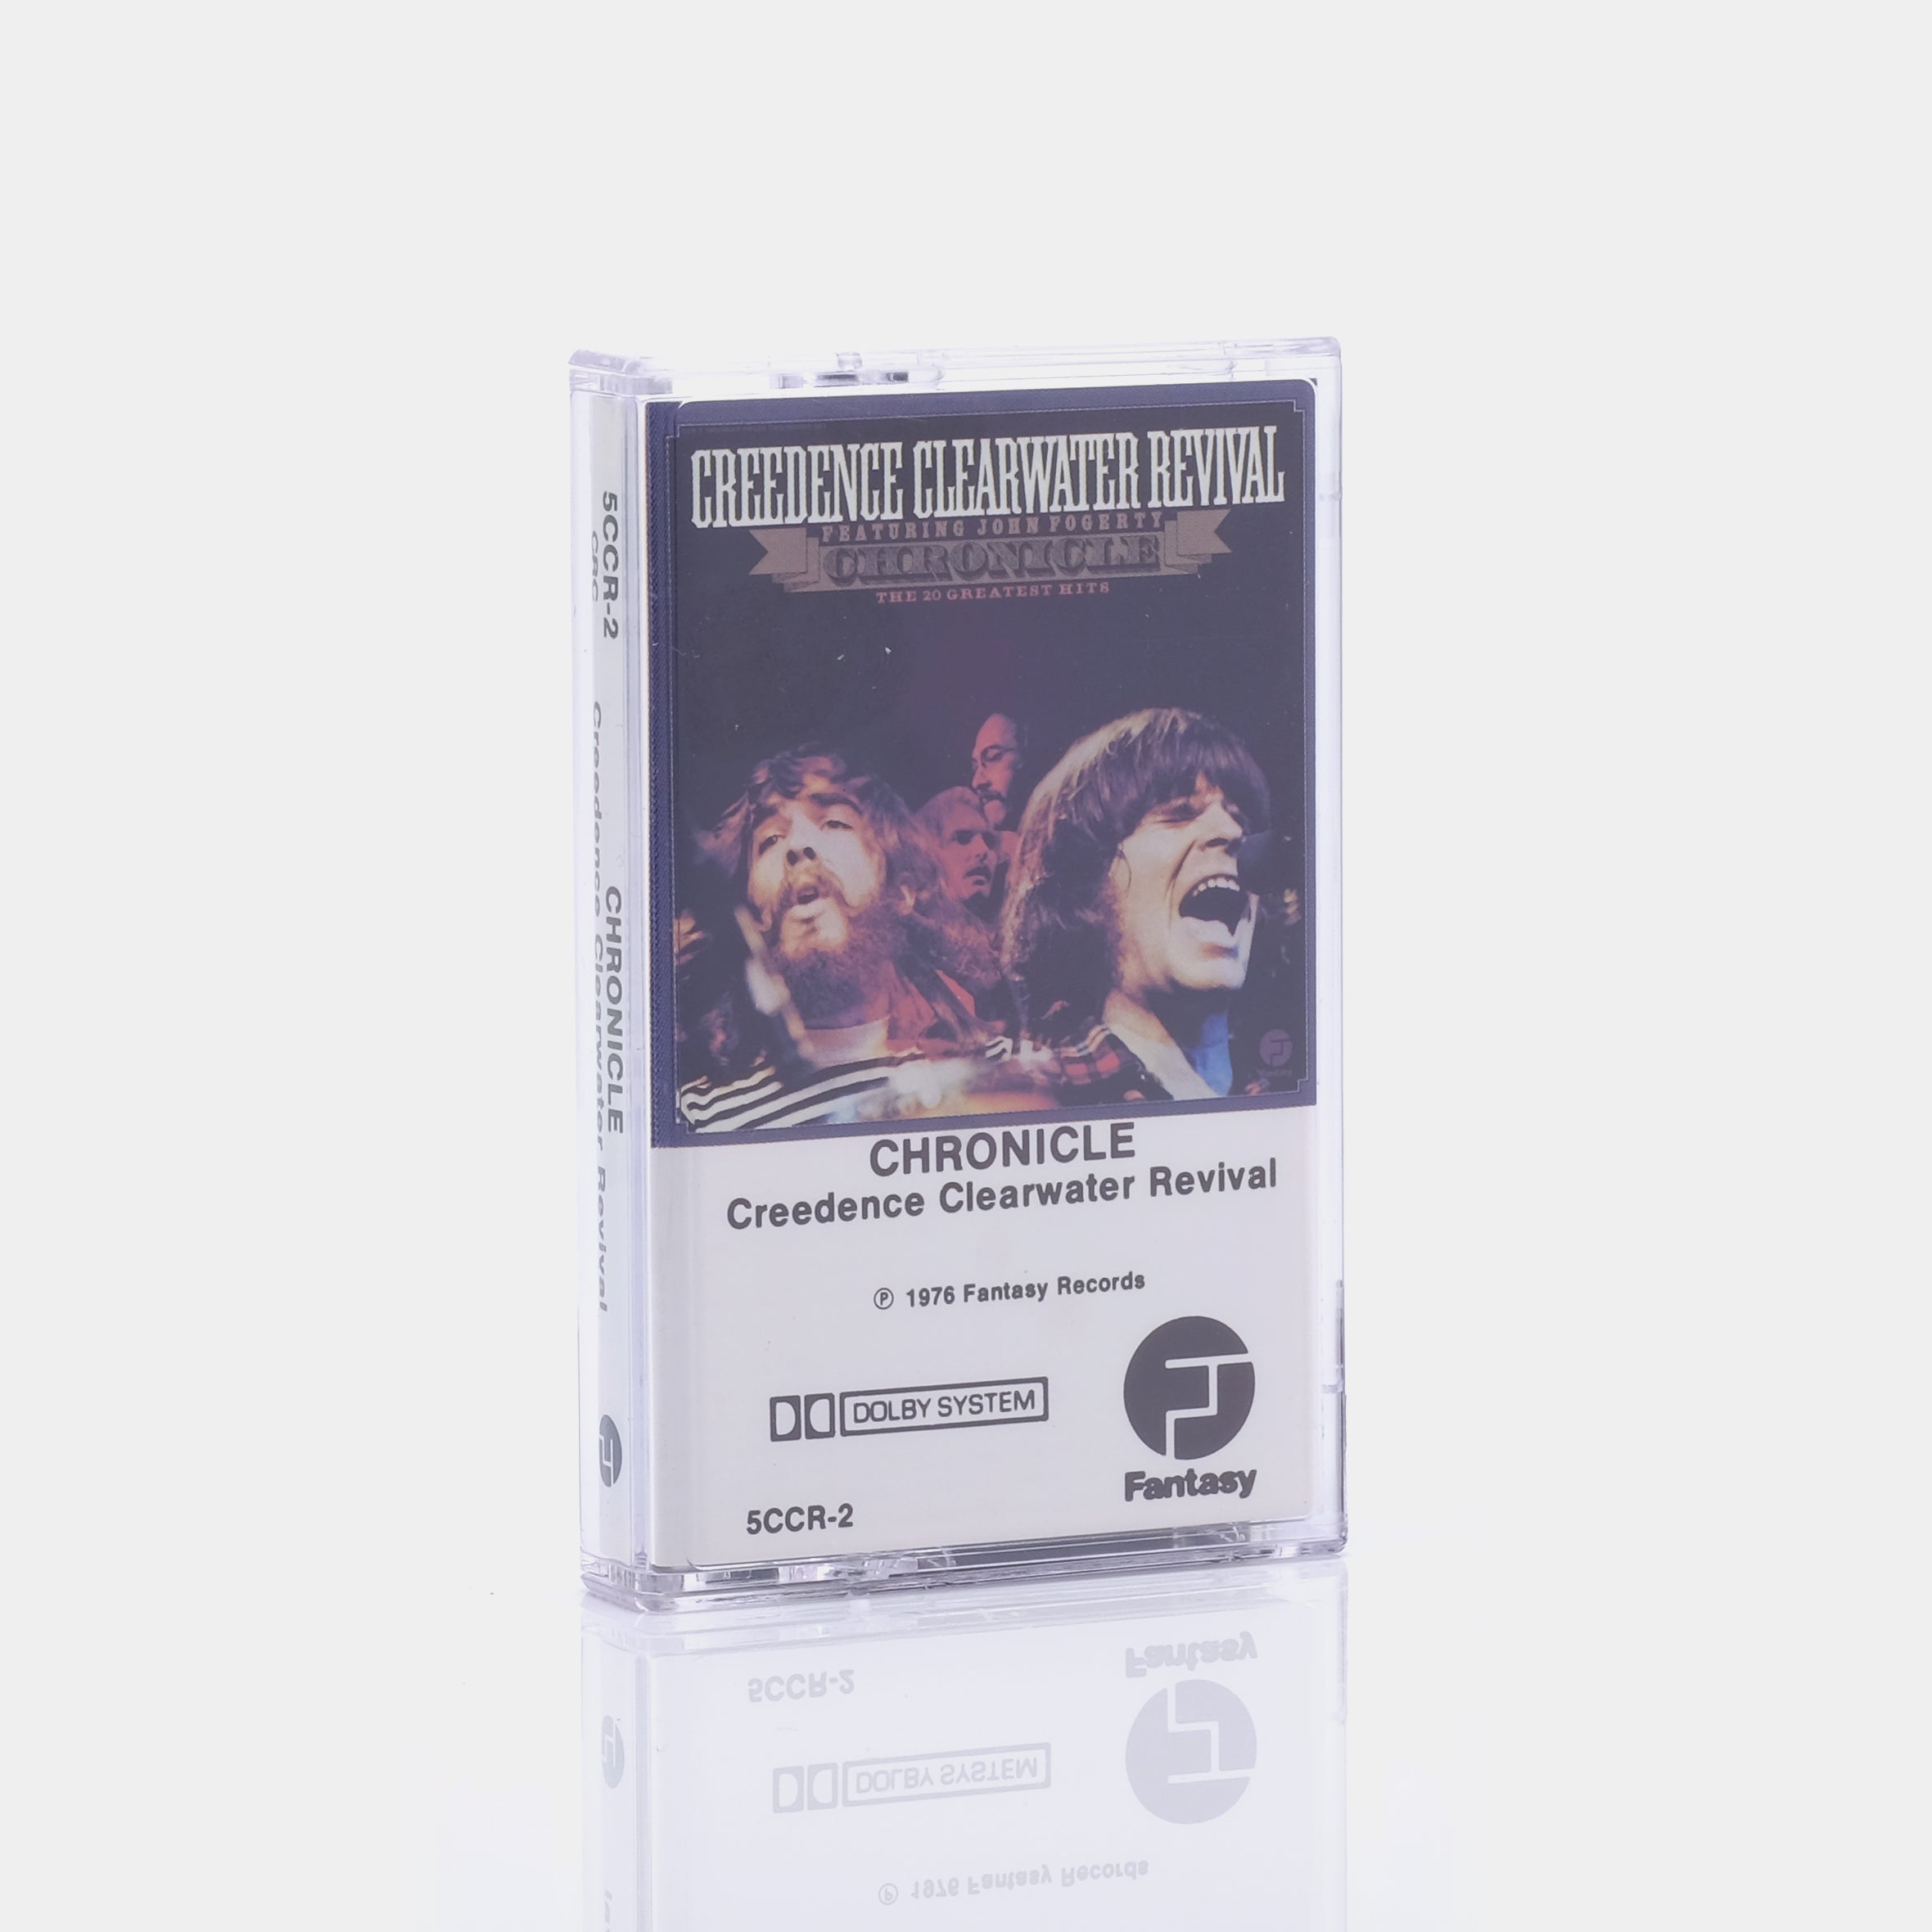 Creedence Clearwater Revival - Chronicle (The 20 Greatest Hits) Cassette Tape